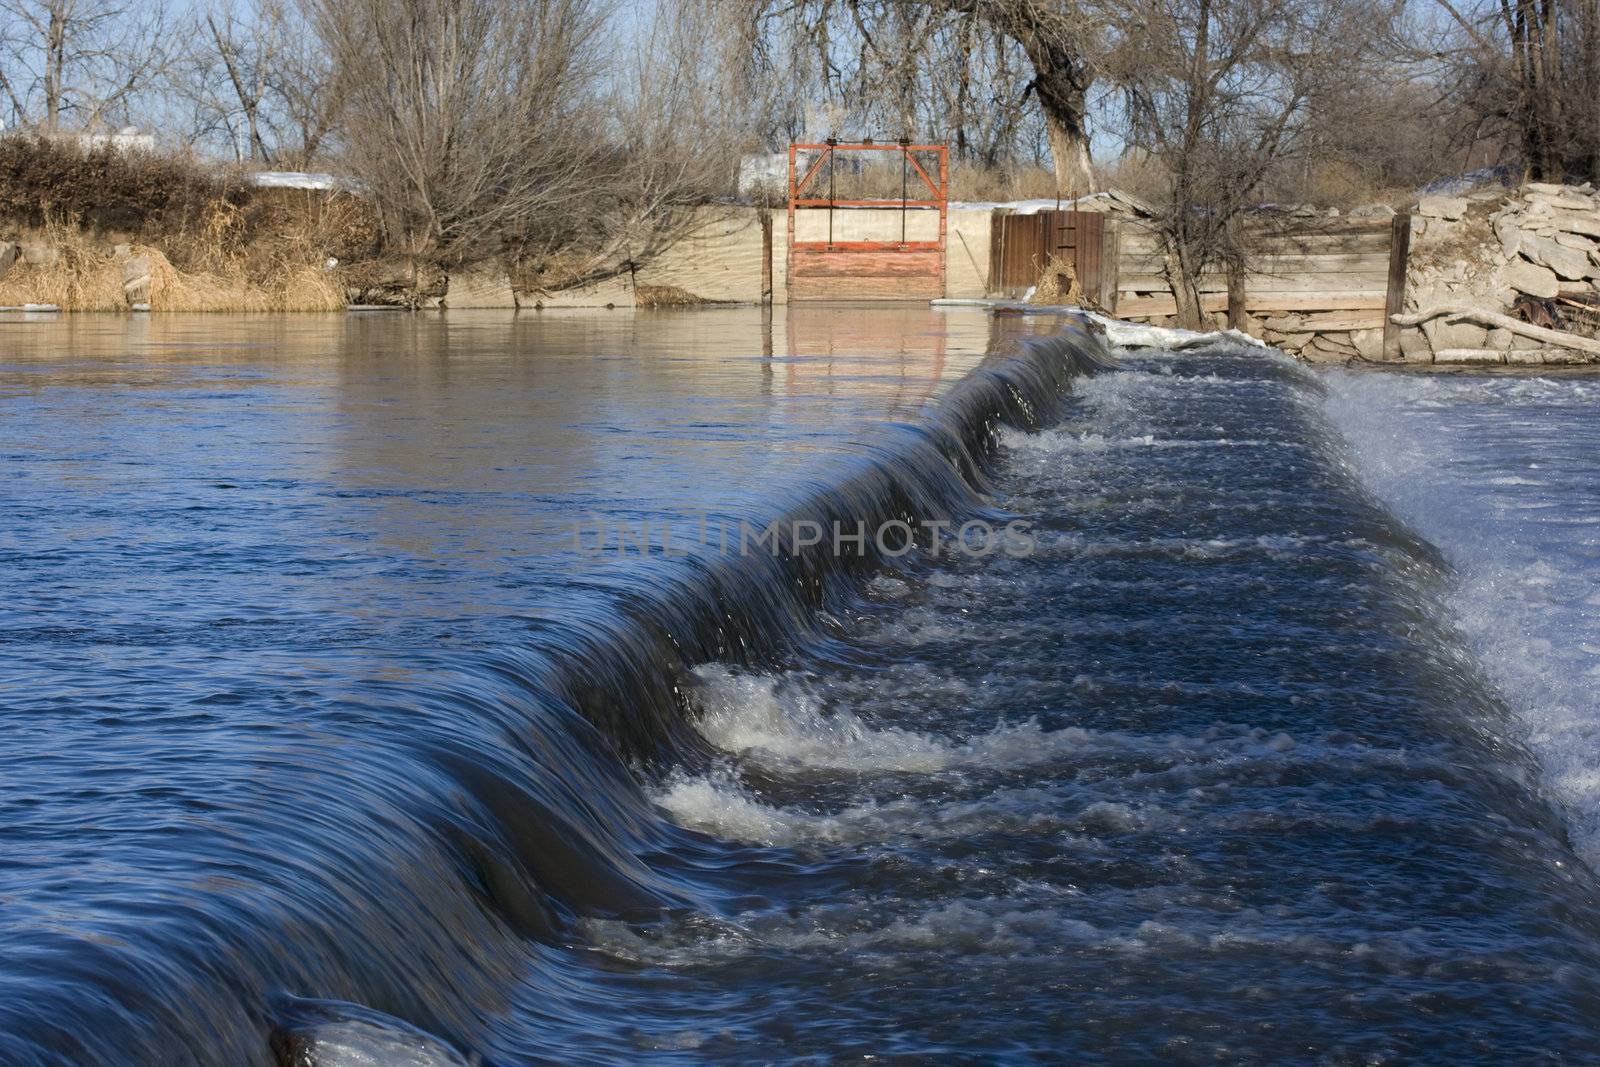 a dam on South Platte River in Colorado near Greeley diverting water for farmland irrigation